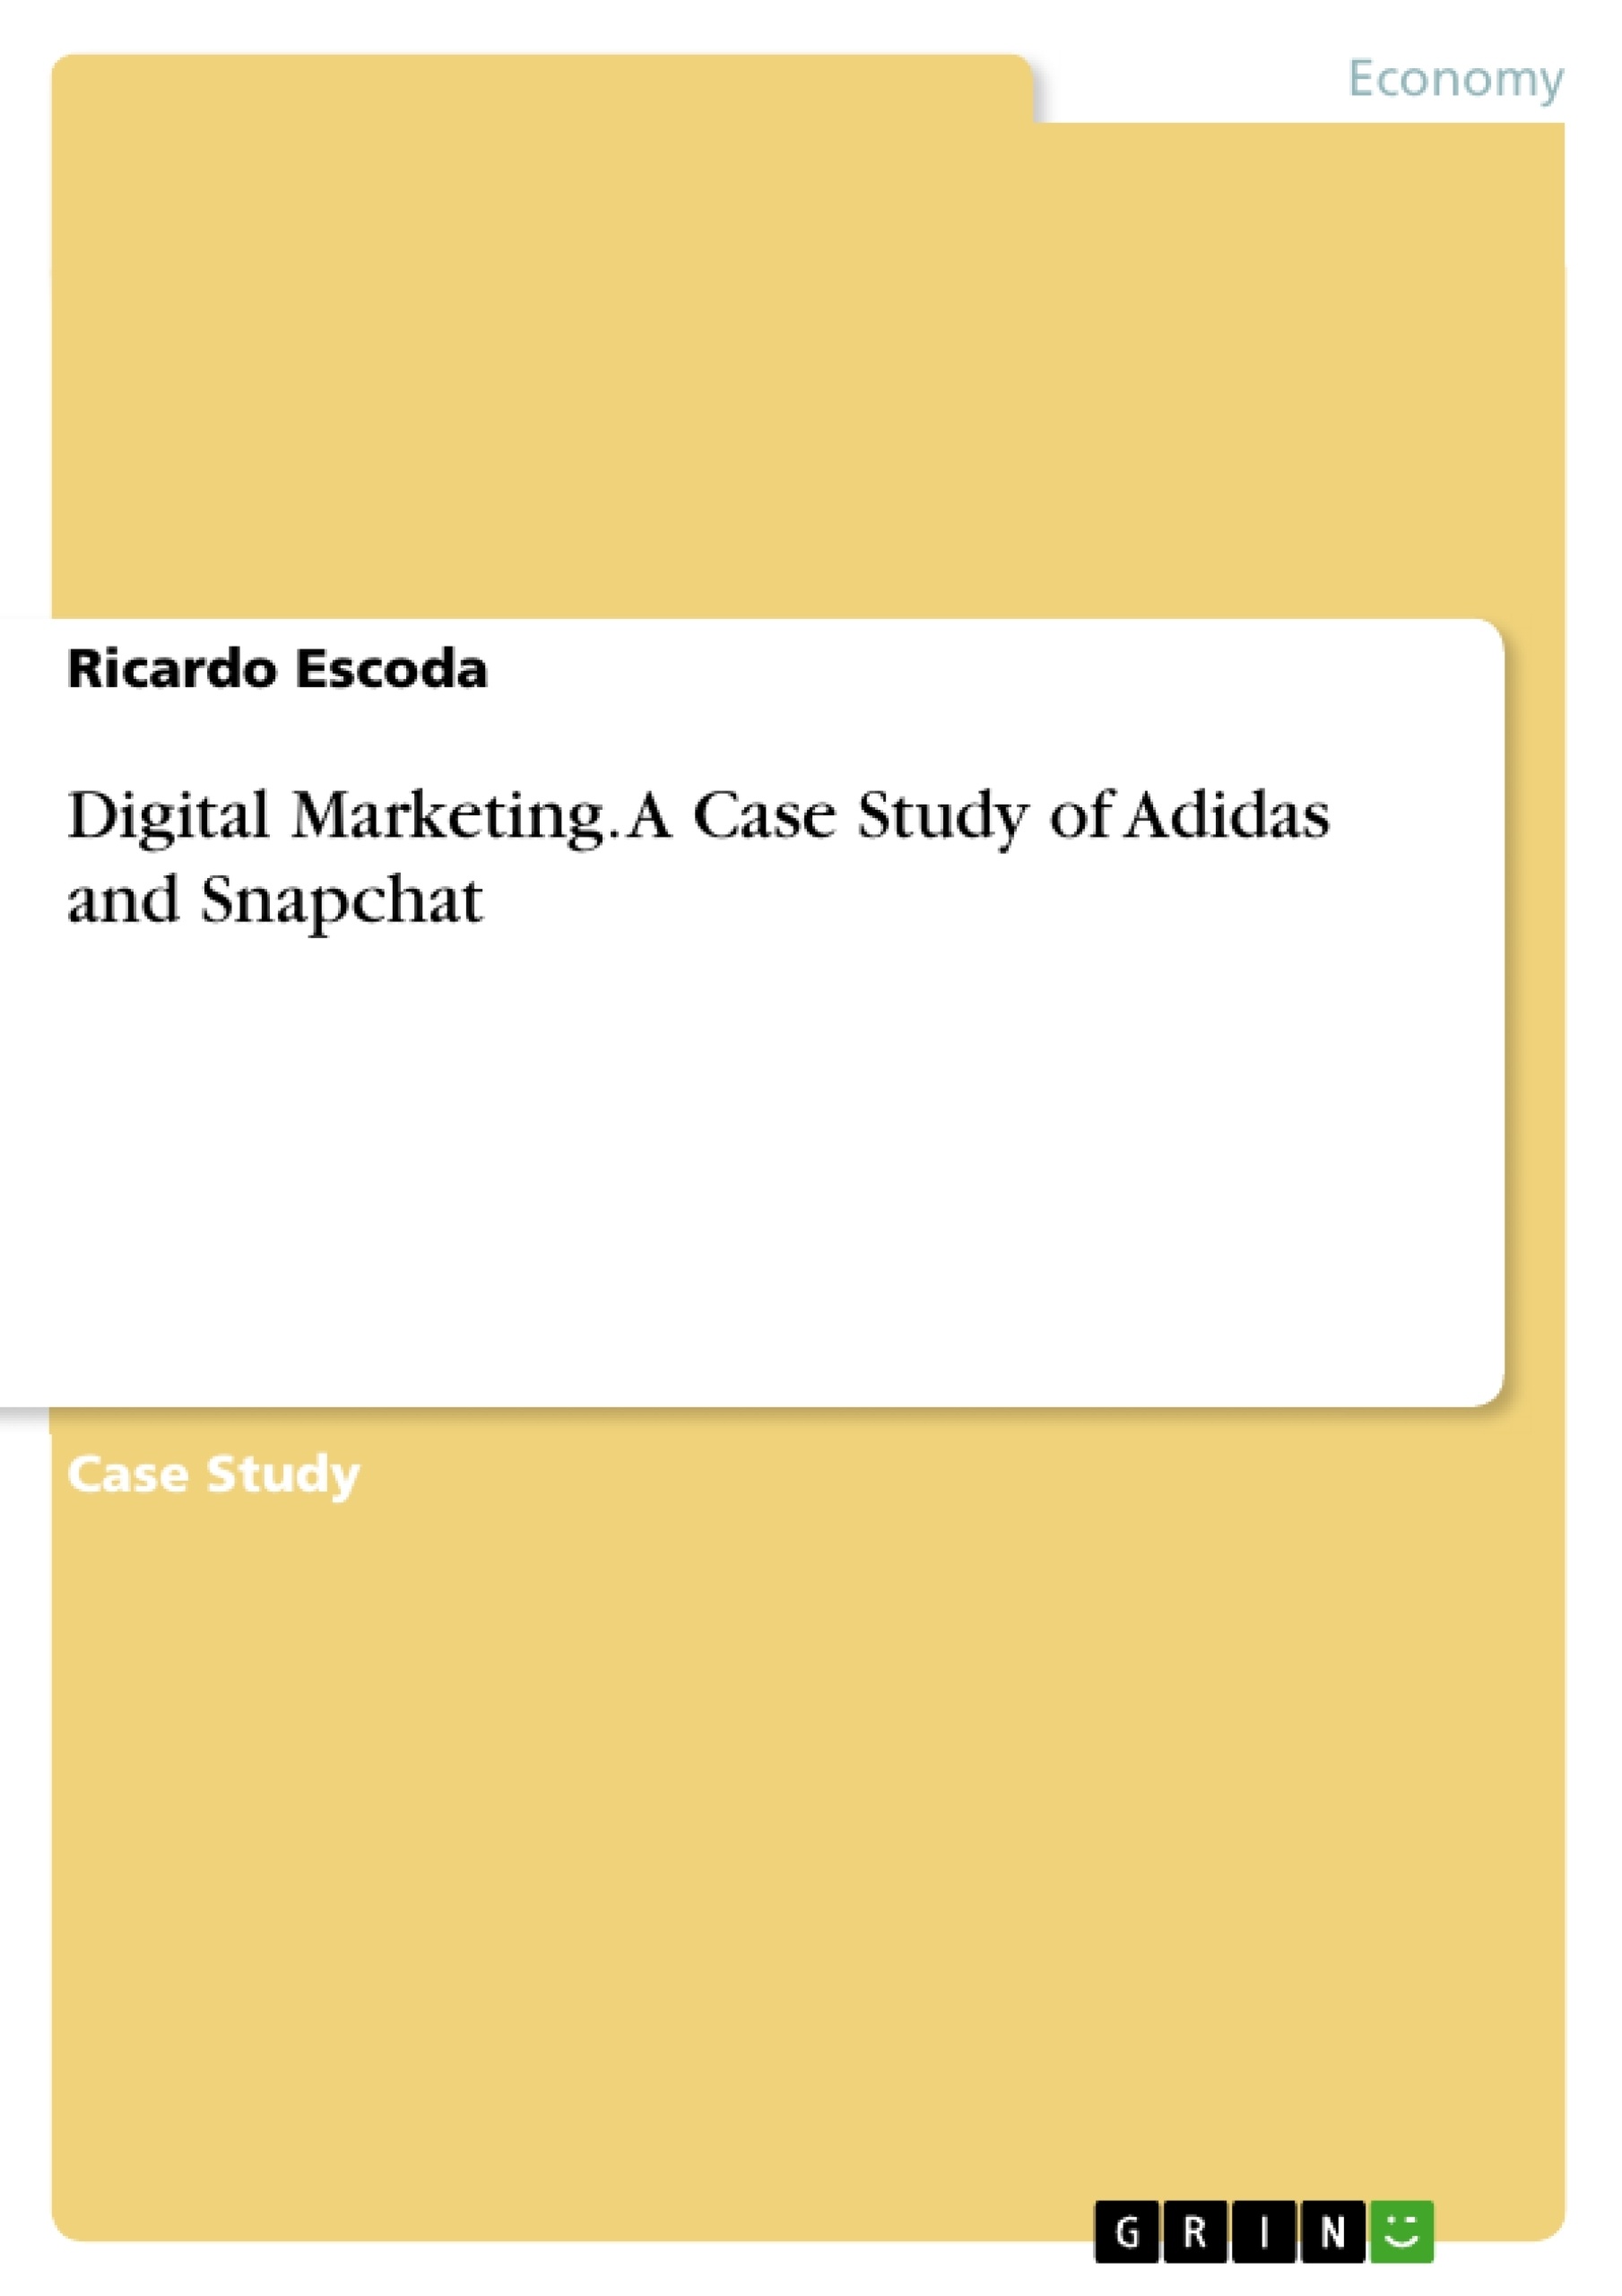 Title: Digital Marketing. A Case Study of Adidas and Snapchat